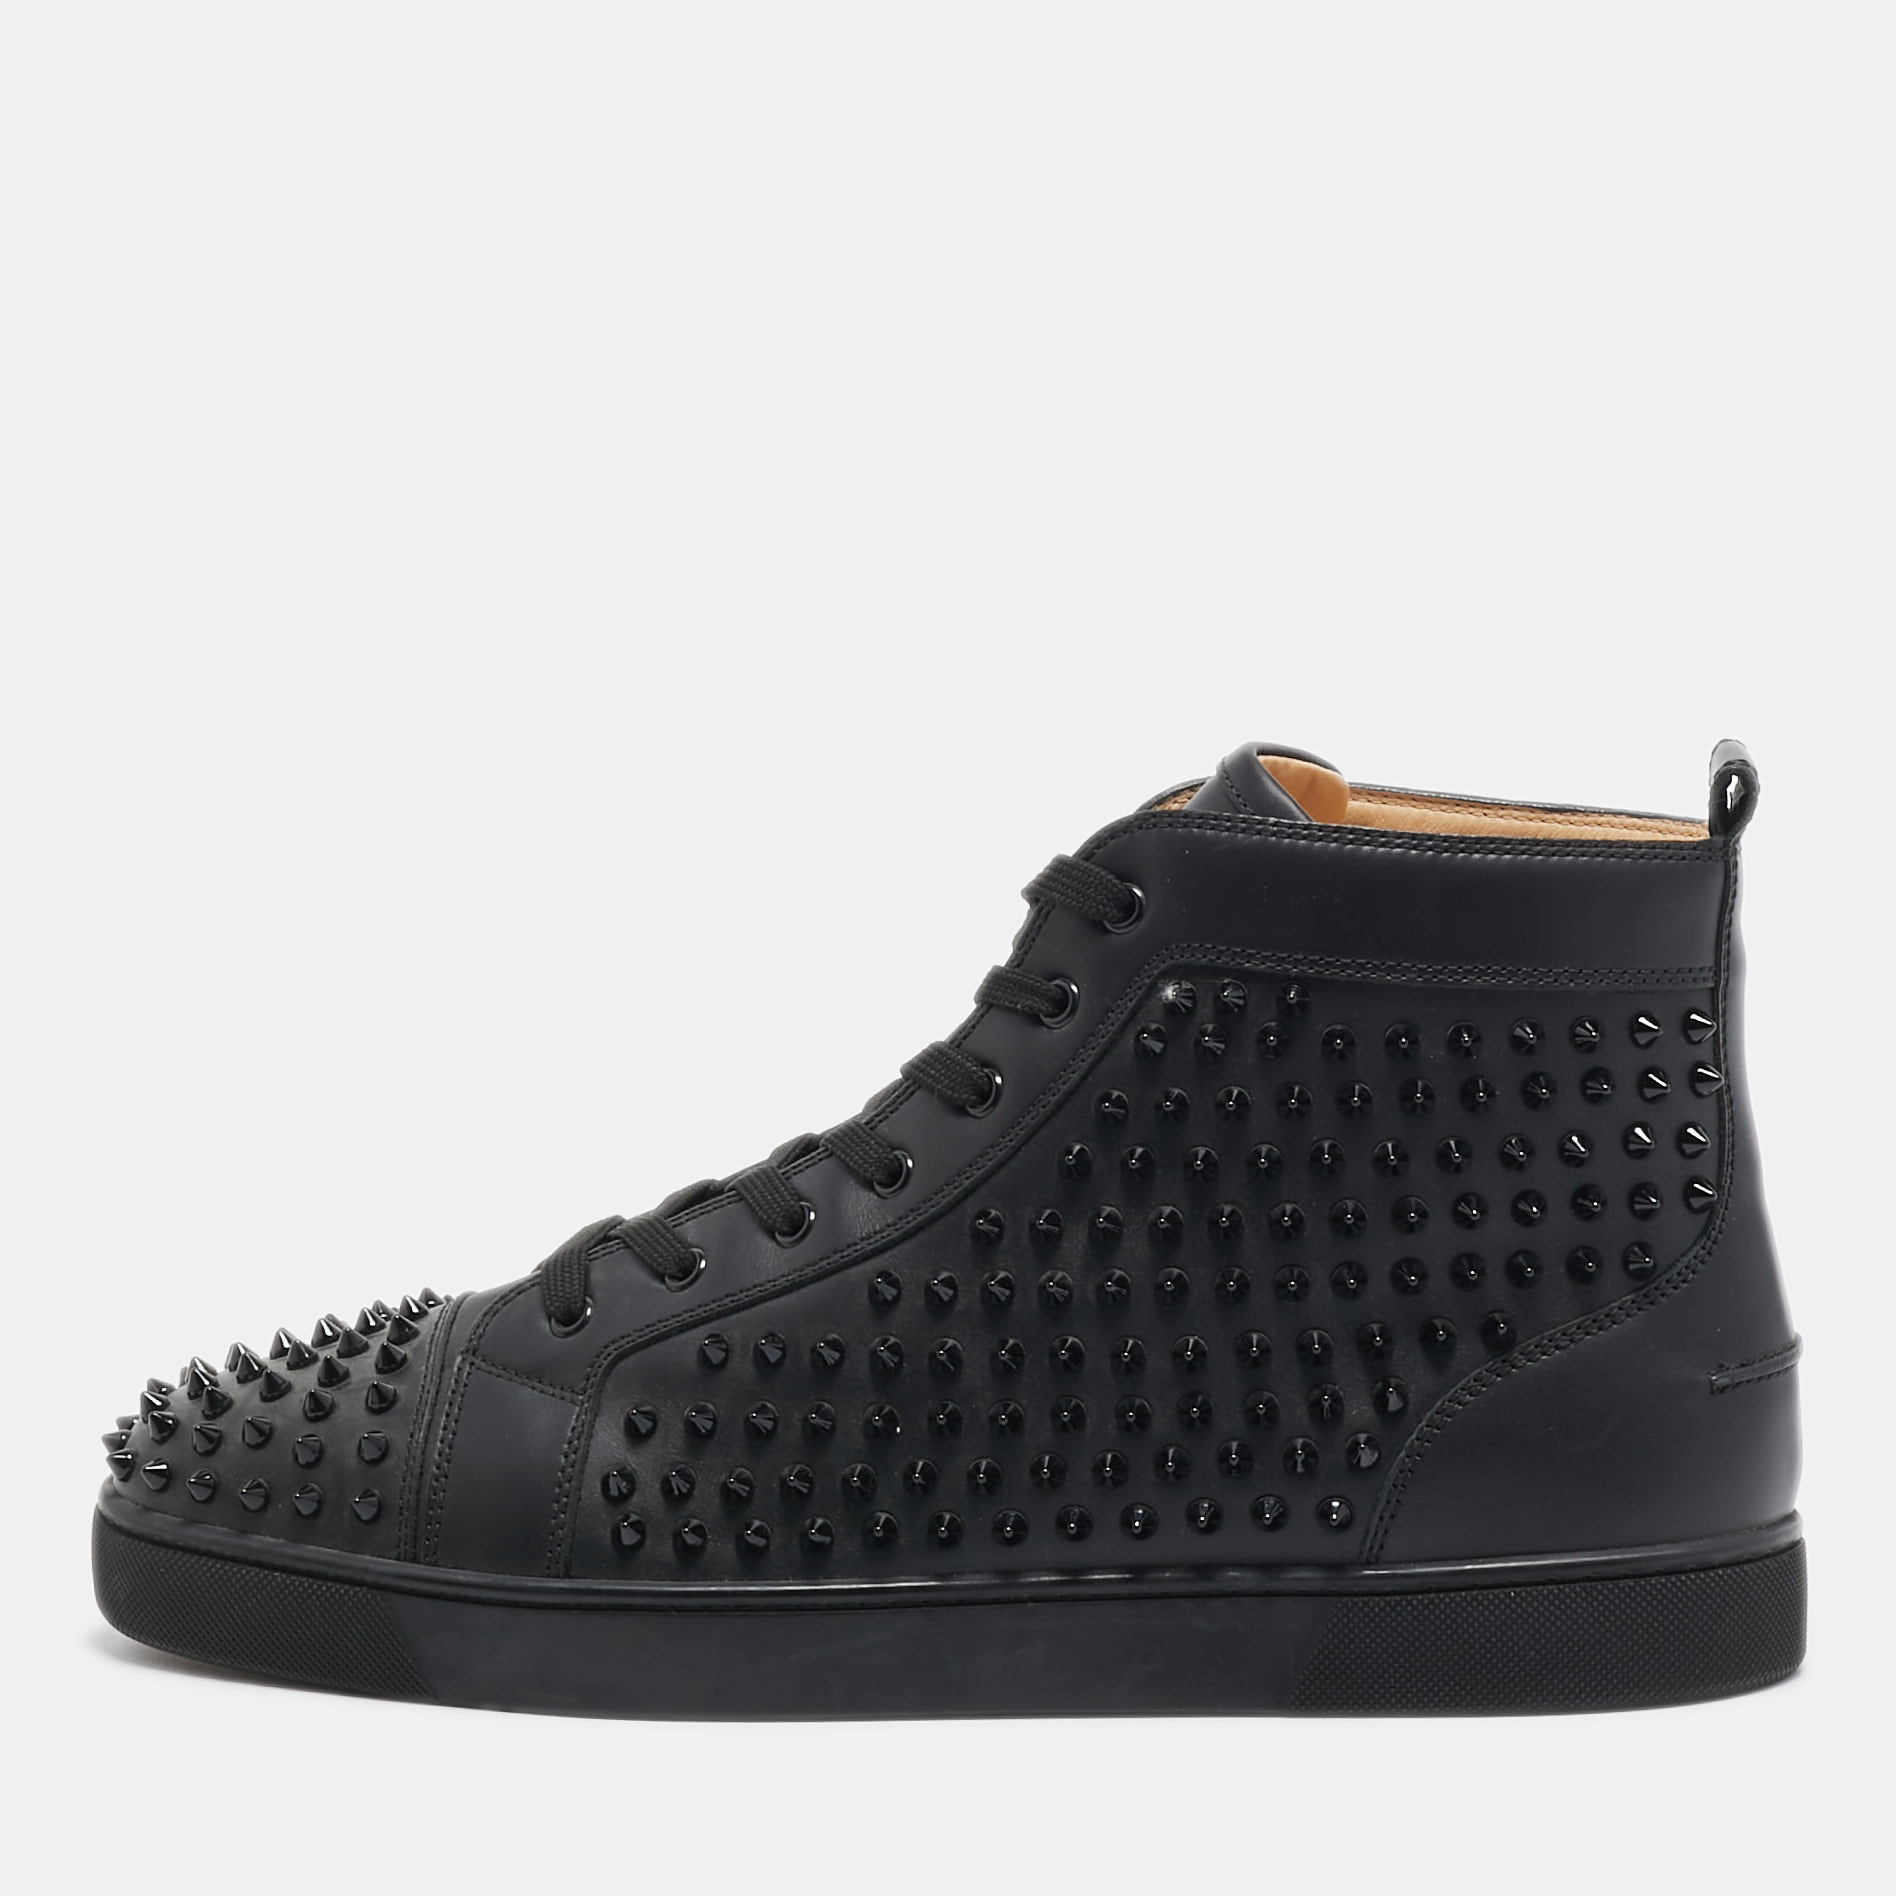 Christian Louboutin Louis Black Leather Spike Cap Toe High Top Sneakers Size 48